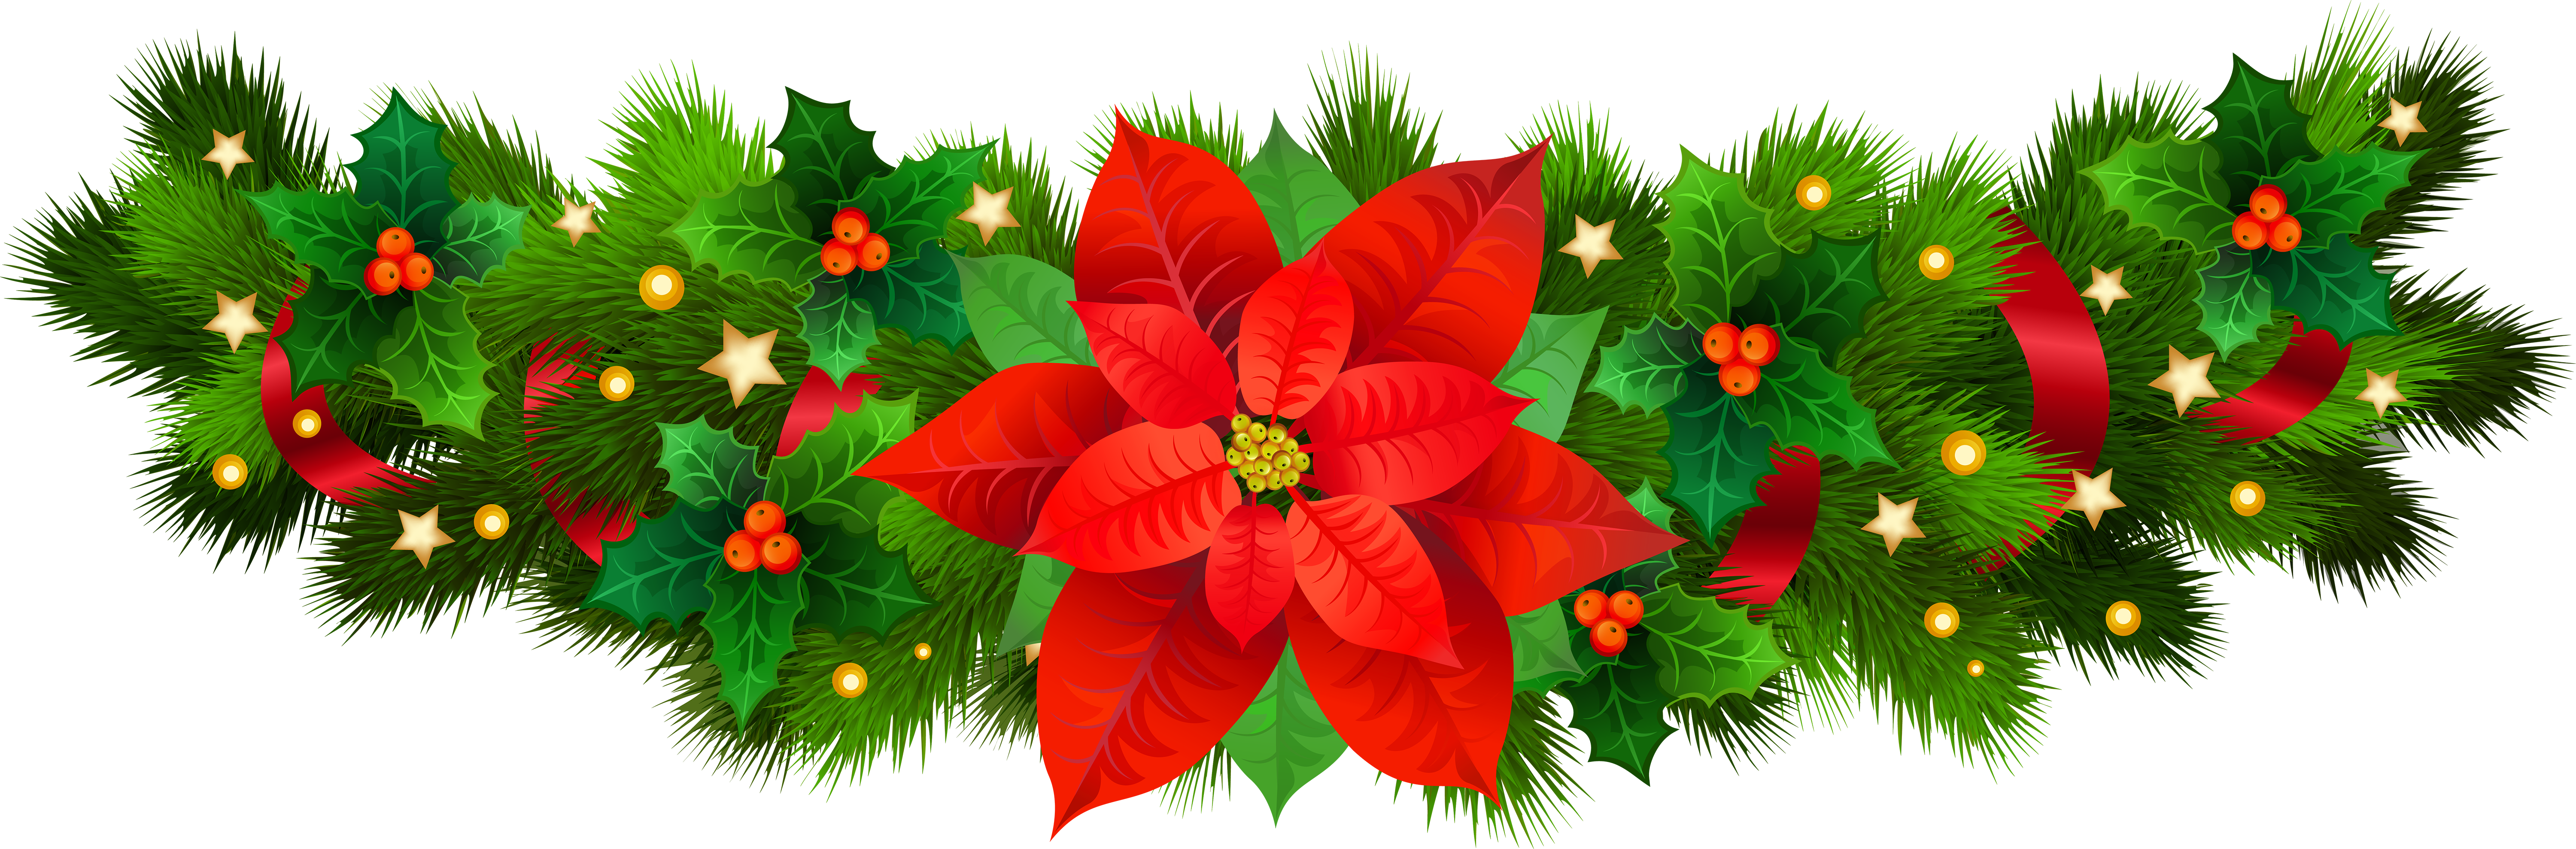 Christmas flower clipart clipart images gallery for free